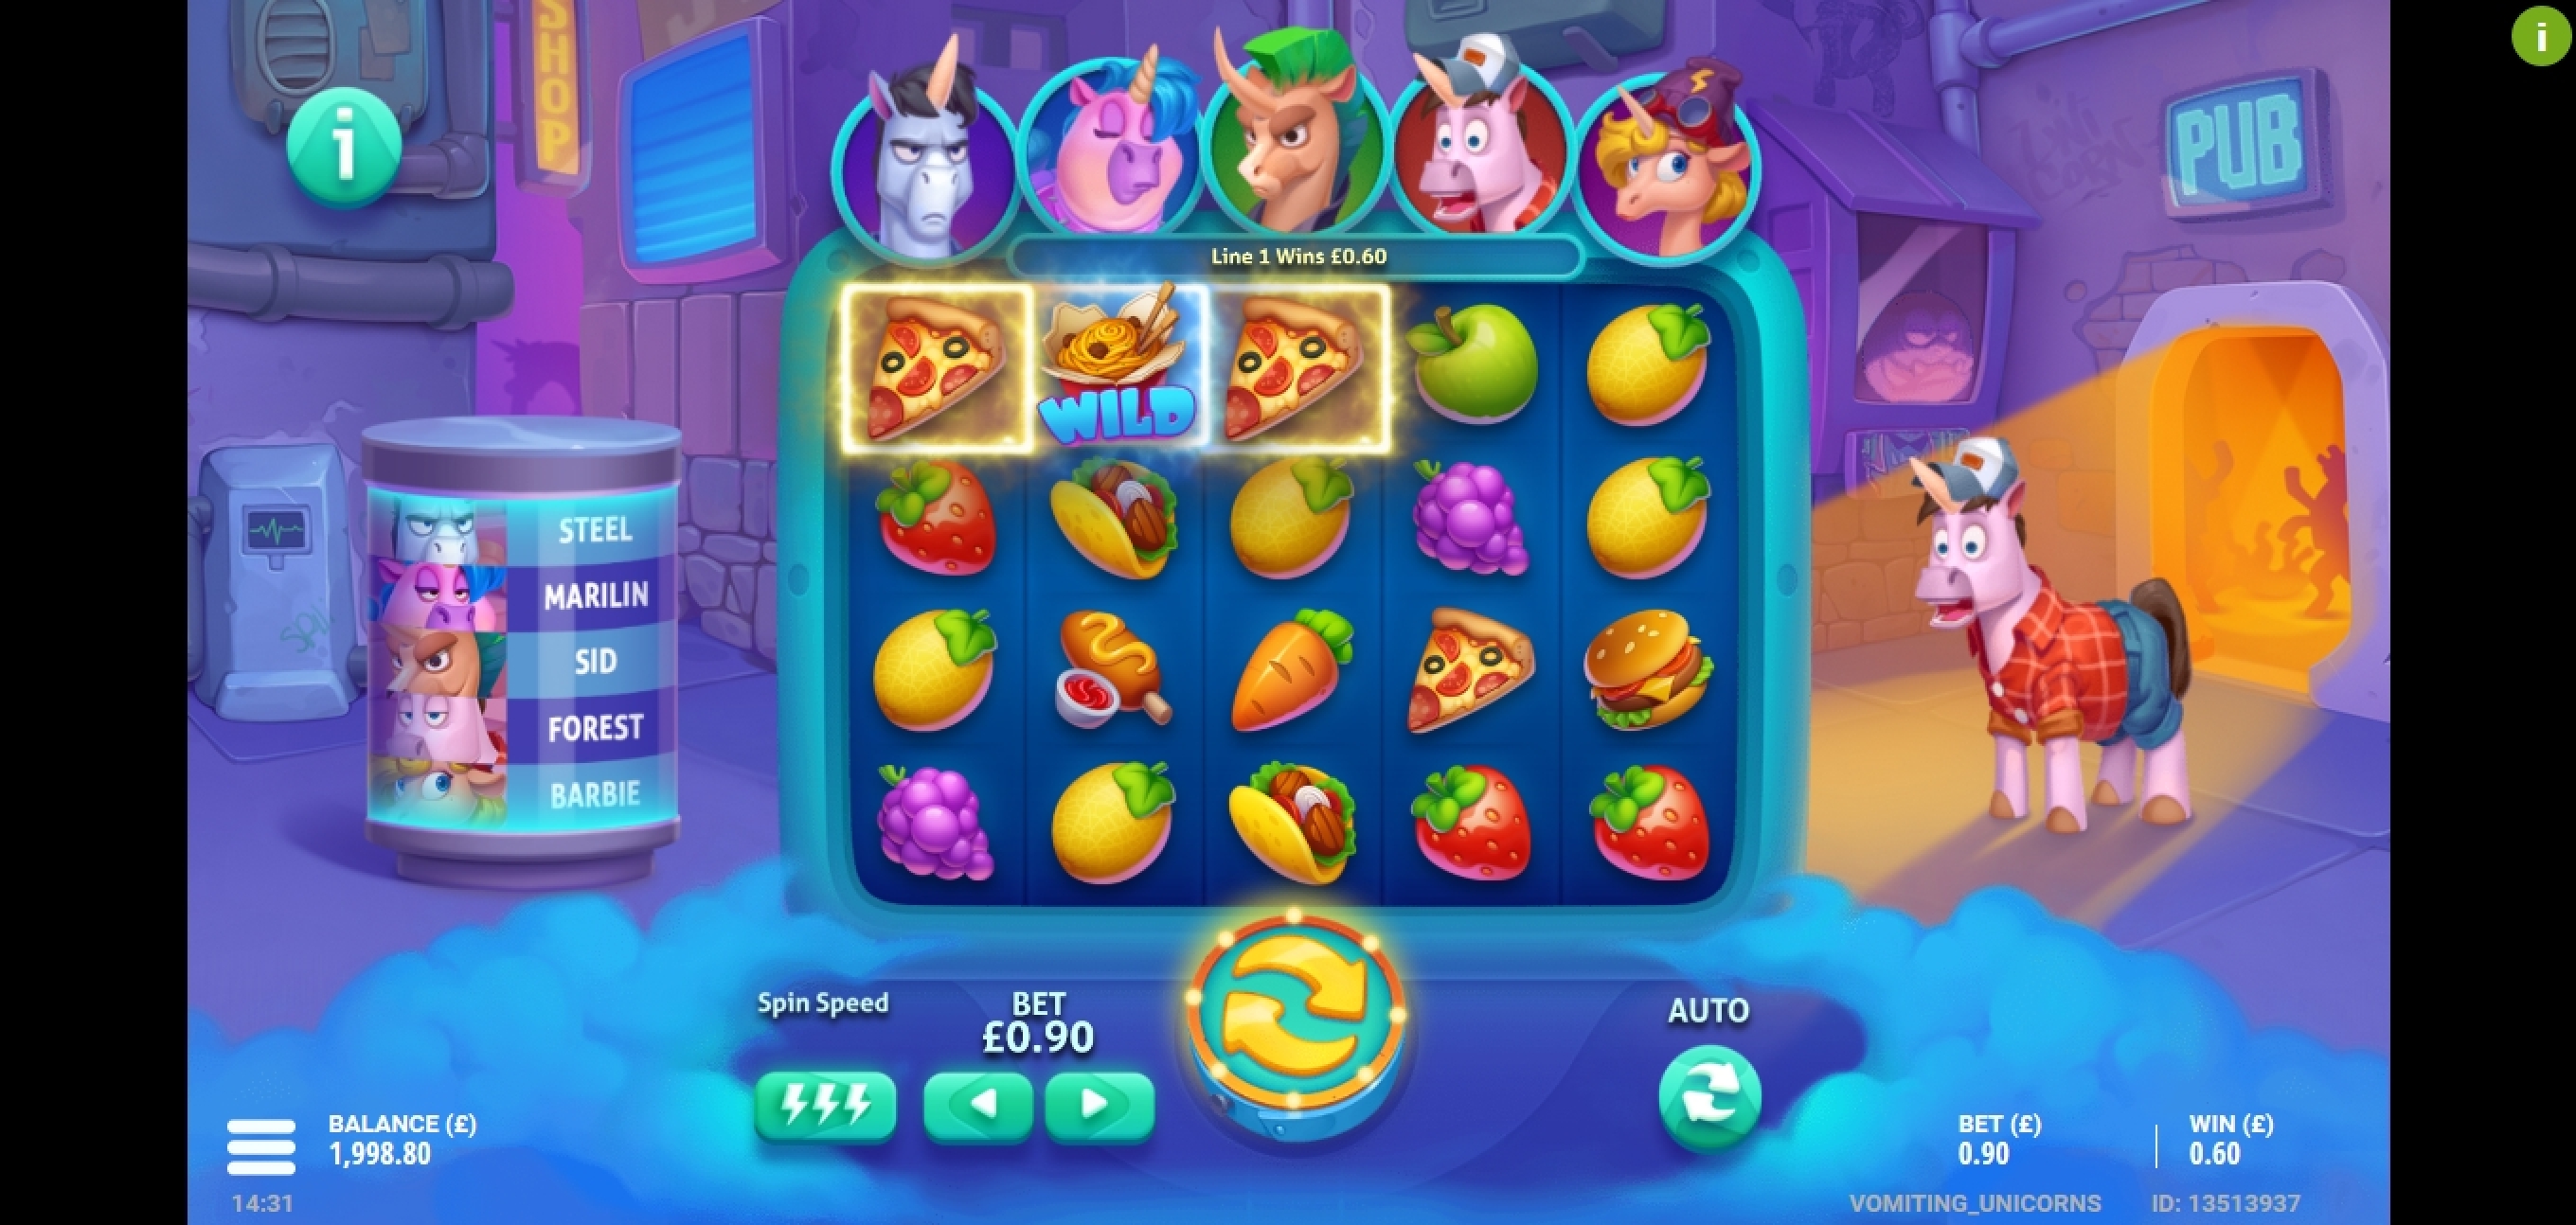 Win Money in Vomiting Unicorns Free Slot Game by Gluck Games